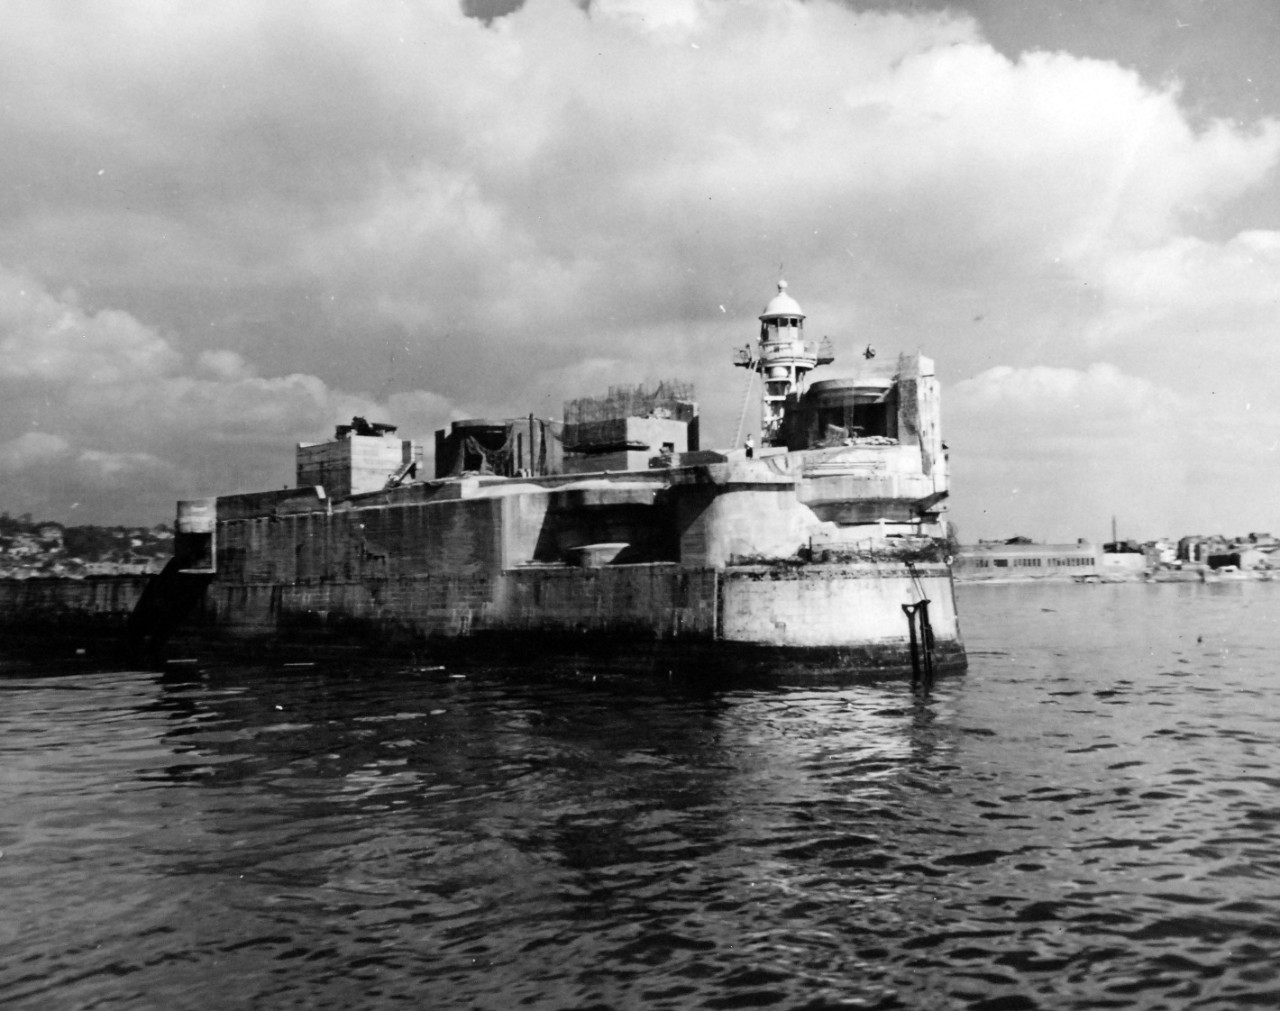 80-G-257304:  Invasion of France, Le Havre, August-September 1944.   German fort, heavily defended but not impregnable, guarded the entrance to harbor of Le Havre, France, which was liberated by Allied troops, 22 September 1944.   Official U.S. Navy Photograph, now in the collection of the National Archives.   (2014/10/28).  